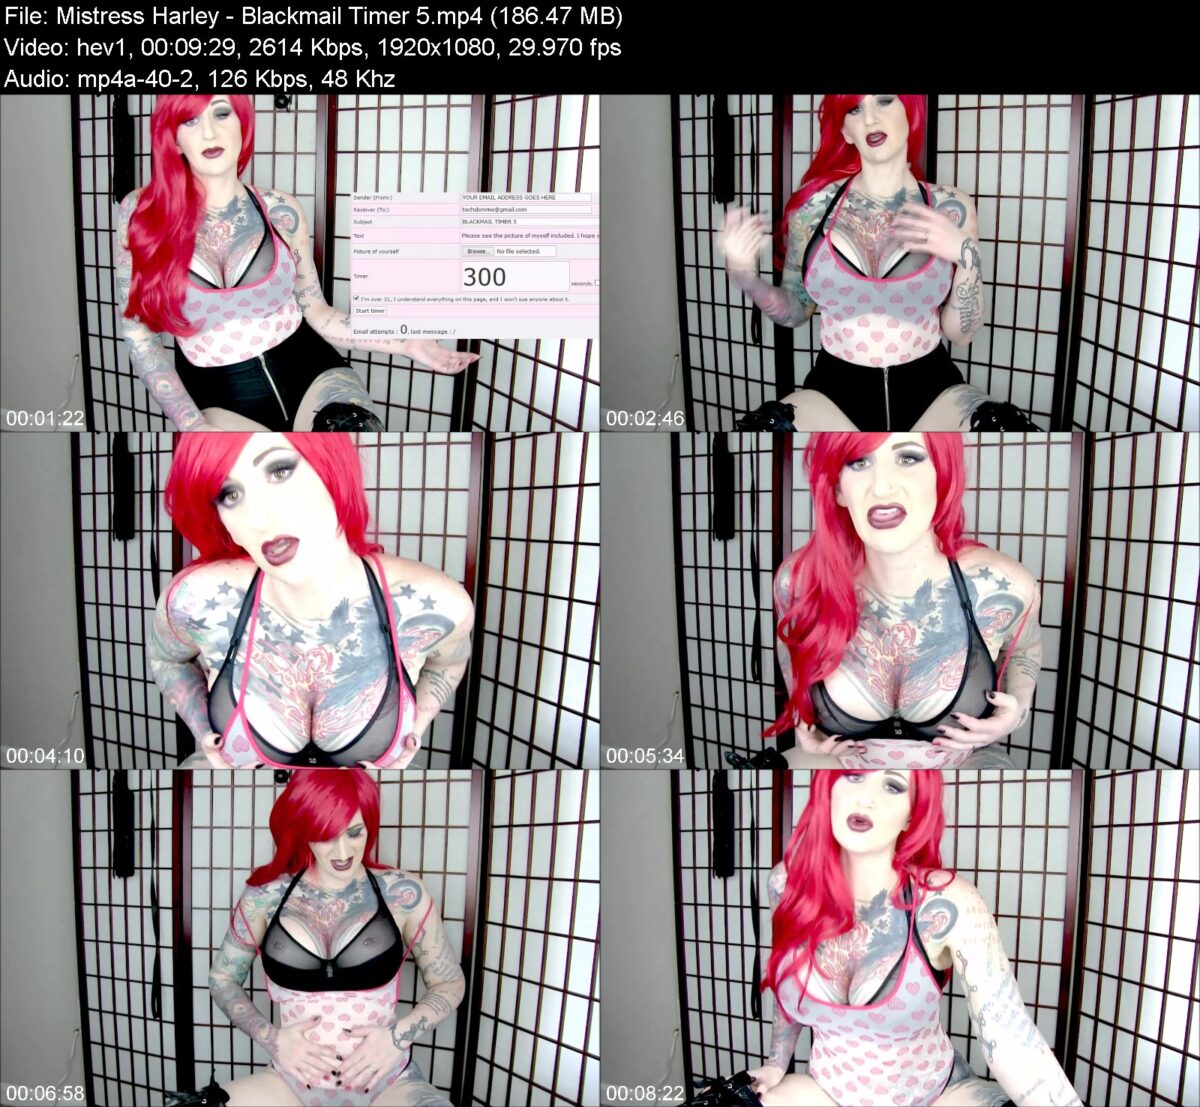 Mistress Harley in Blackmail Timer 5